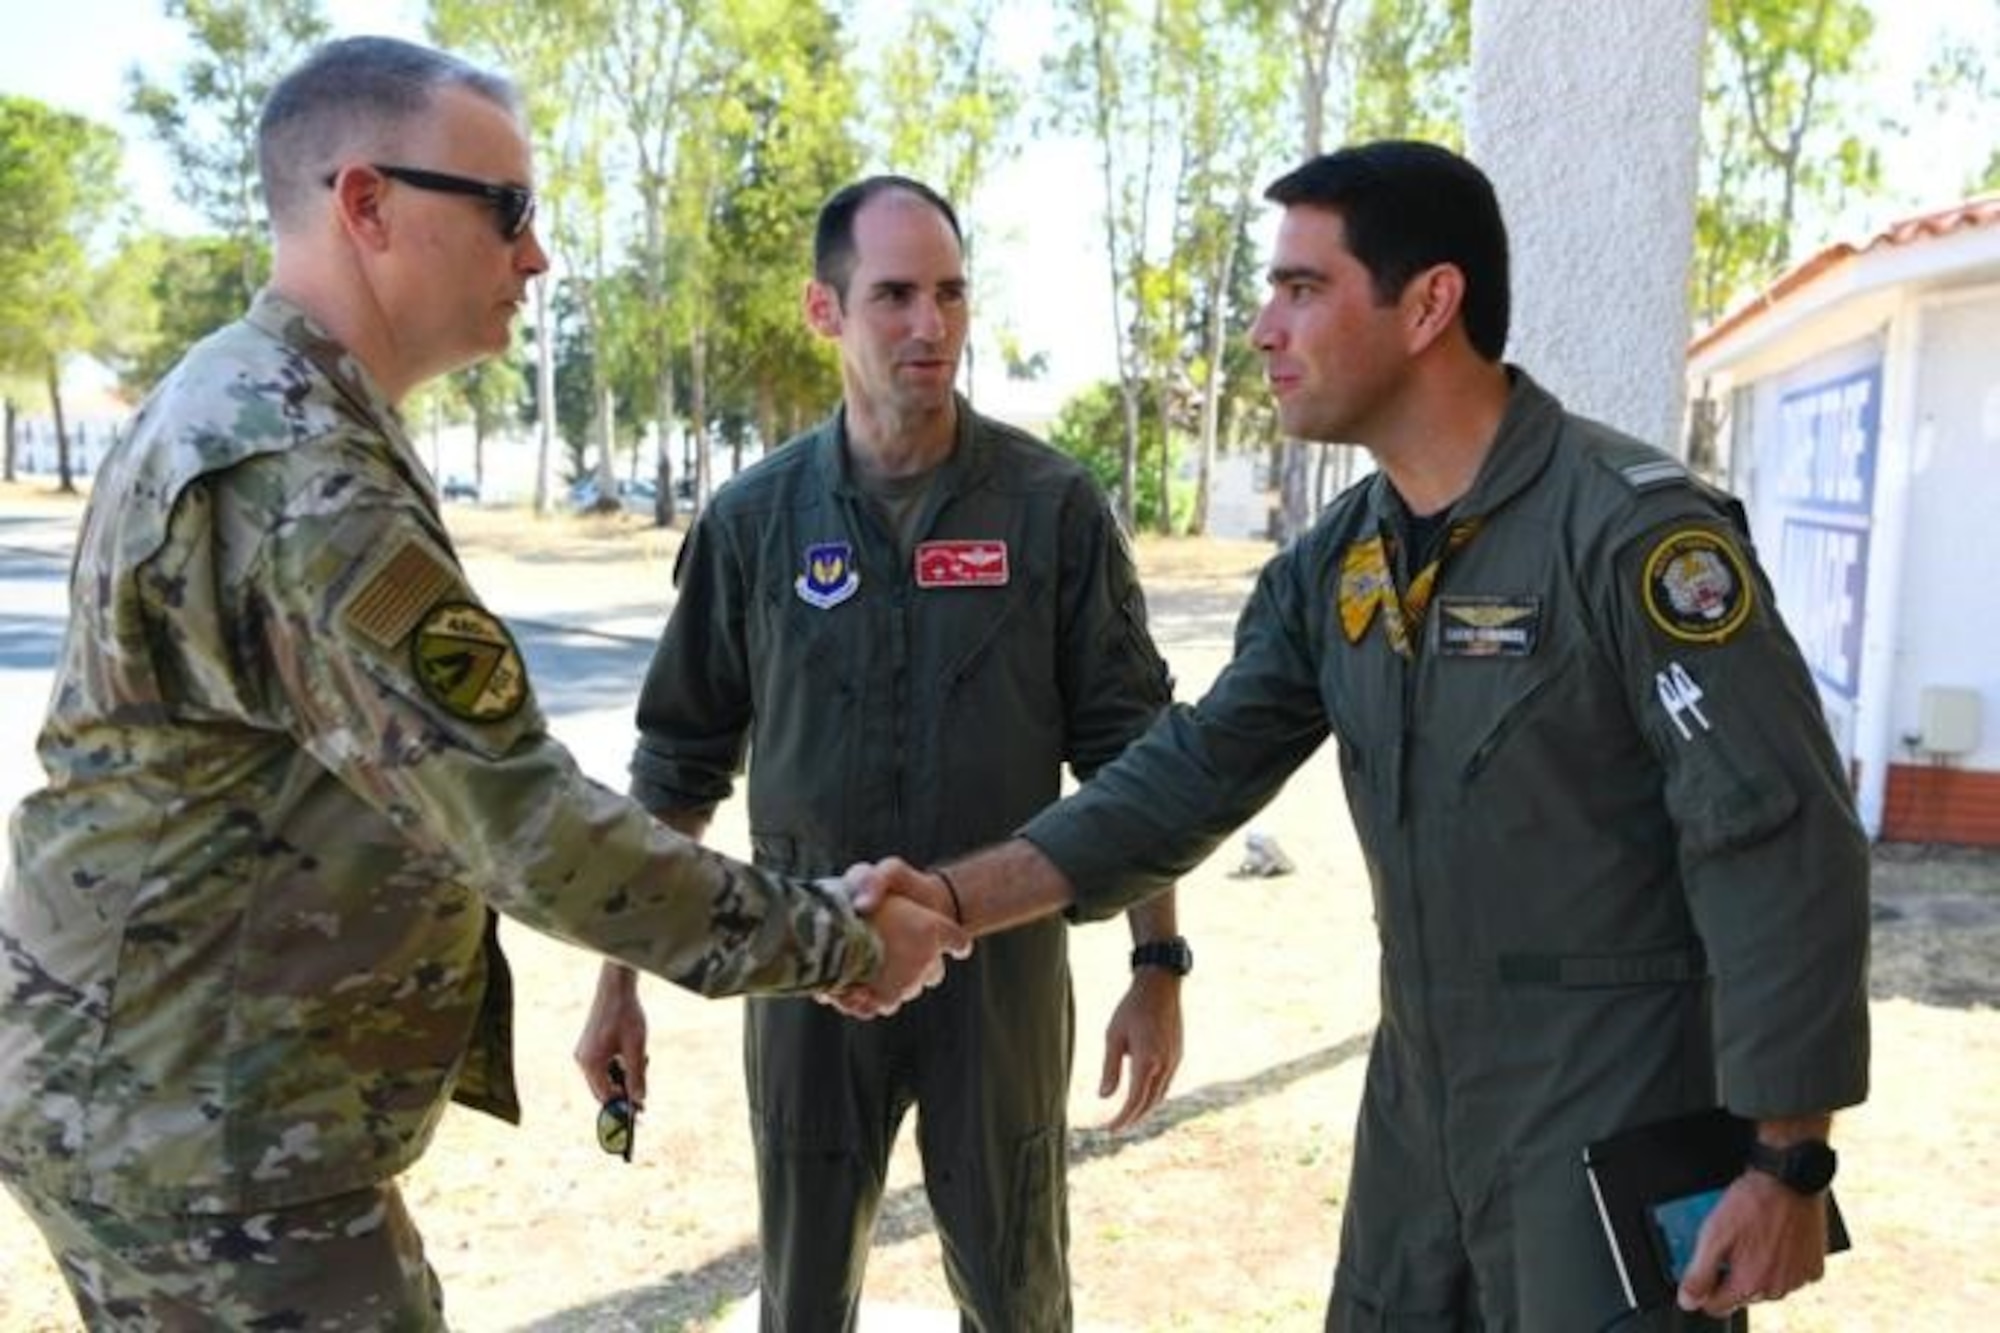 U.S. Air Force Col. Thomas Graham, 52nd Operations Group commander (center), and Chief Master Sgt. Mark Rogers, 52nd Operations Group senior enlisted leader (left), both  stationed at Spangdahlem Air Base, Germany, greet Maj. Jose “Driller” Fernandes of the Portuguese air force, during a key leader engagement at Exercise Real Thaw 22, on Beja Air Base, Portugal, July 5, 2022. Senior leadership from participating NATO partner countries visited in order to observe this significant European exercise. (U.S. Air Force photo by Tech. Sgt. Warren D. Spearman Jr.)